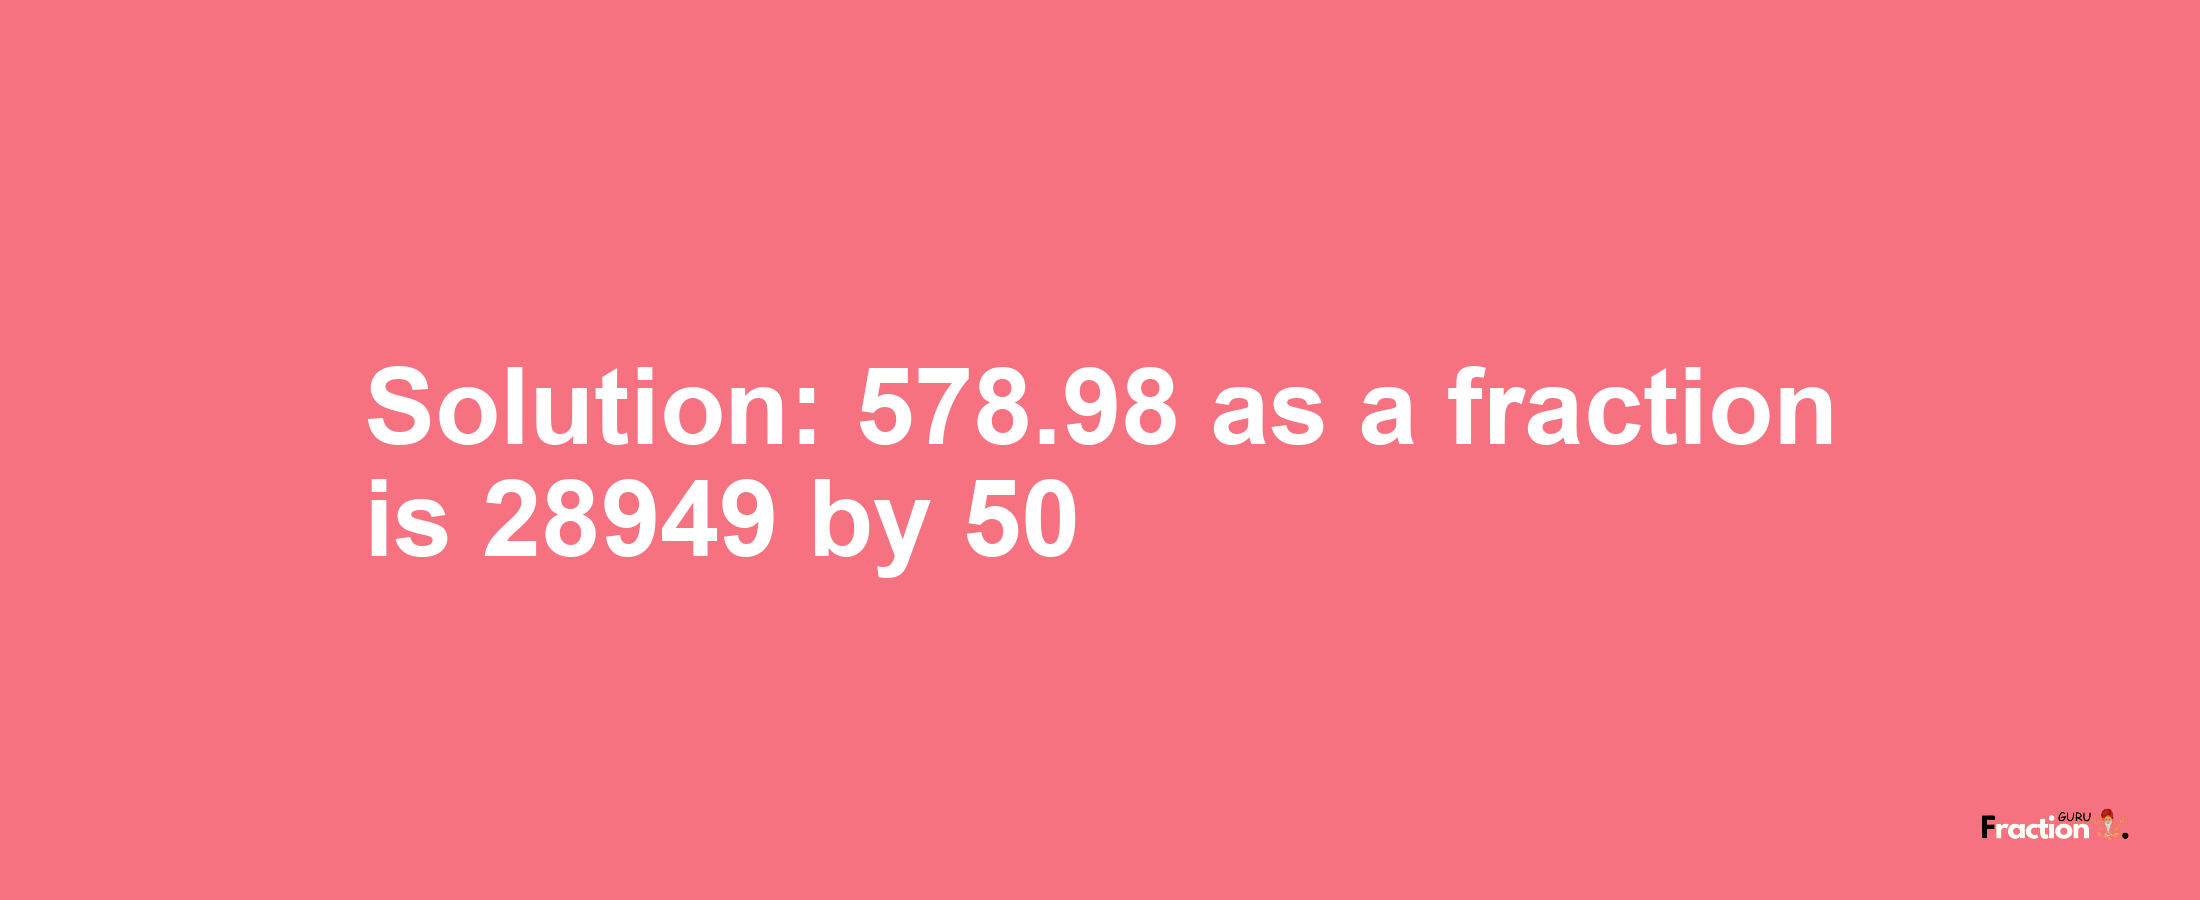 Solution:578.98 as a fraction is 28949/50